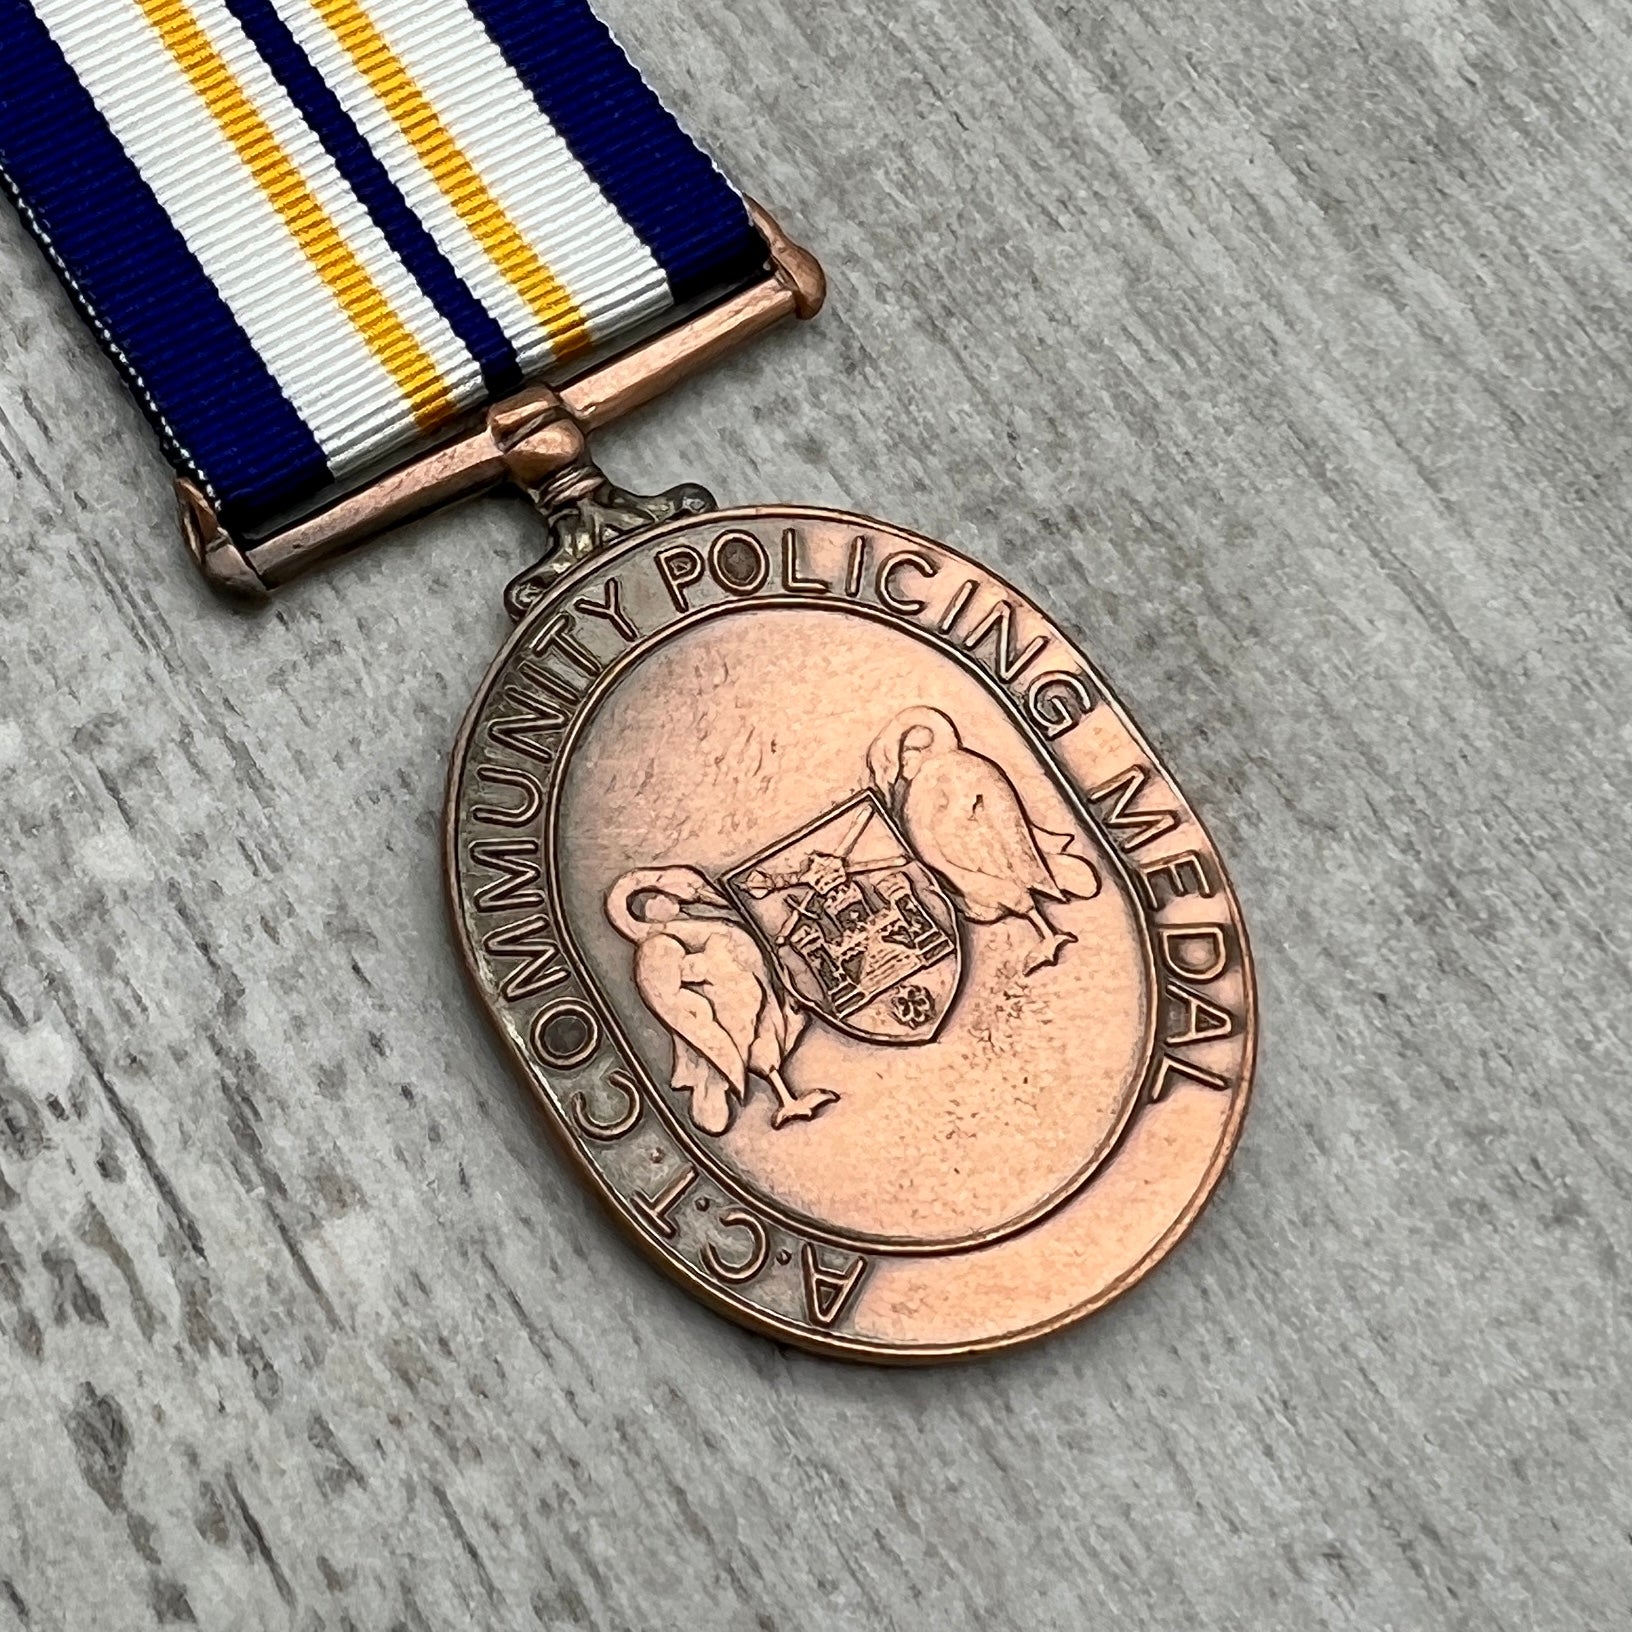 Australian Capital Territory - Community Policing Medal - Foxhole Medals